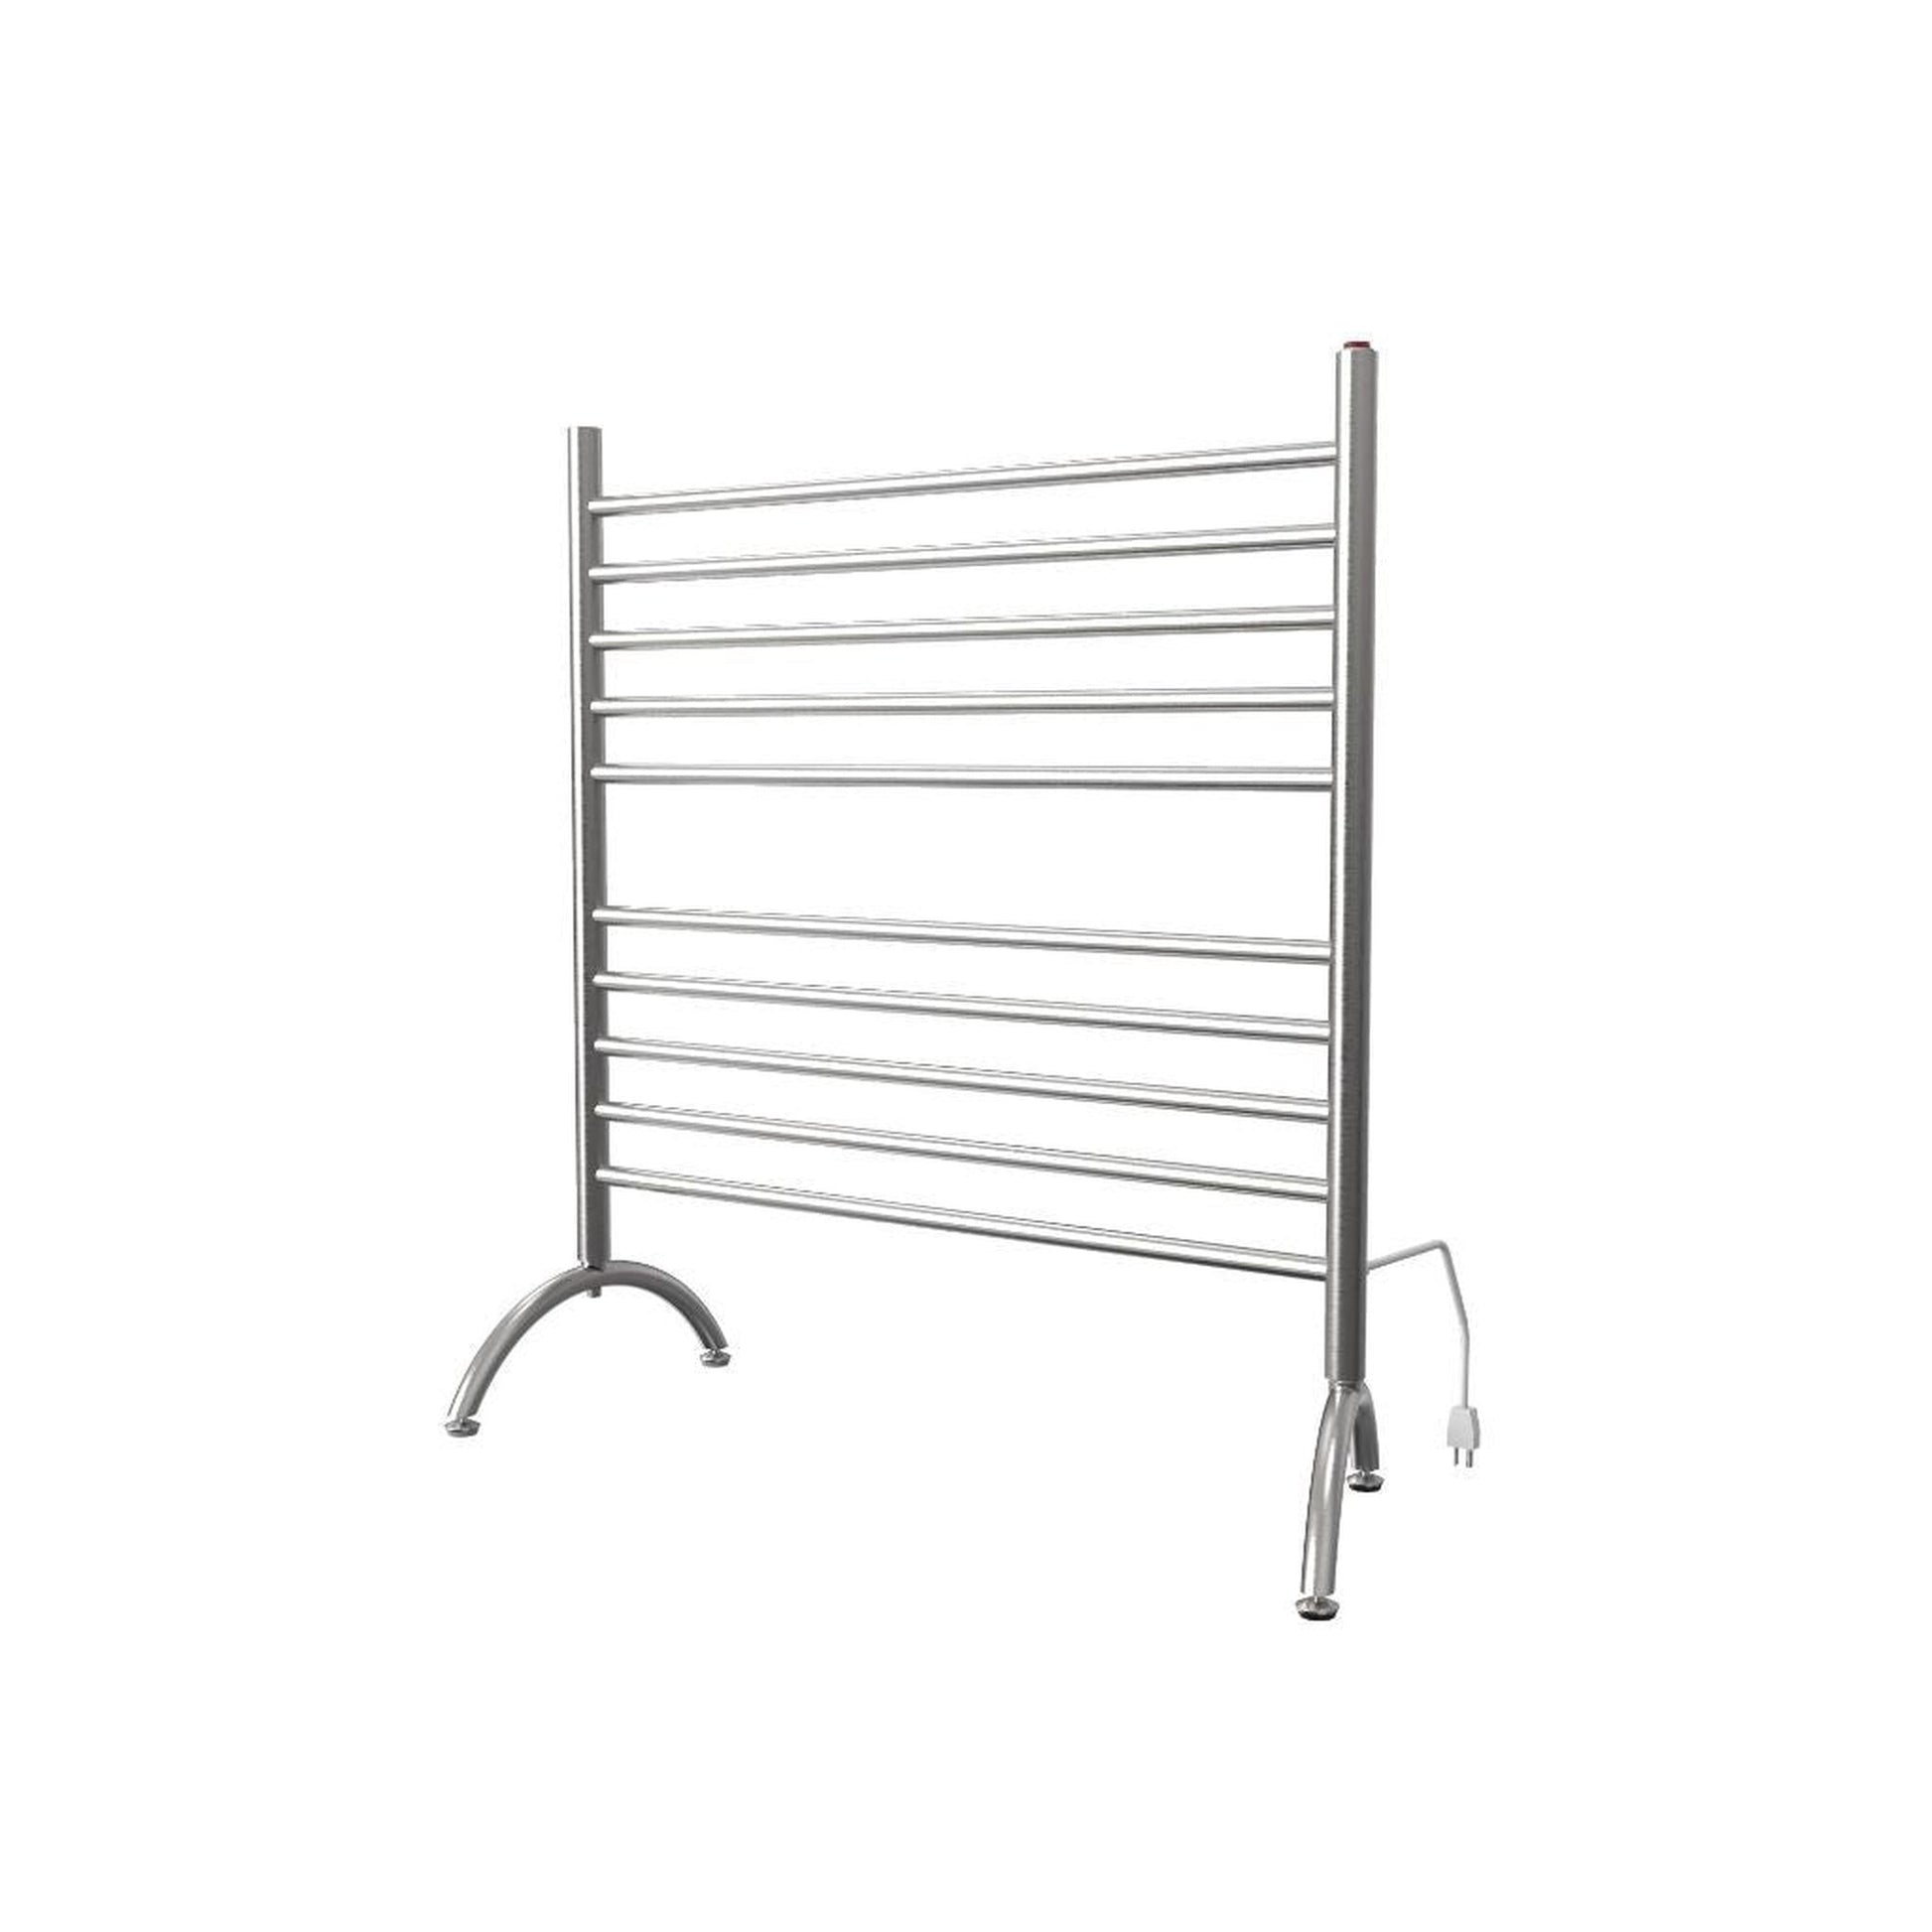 Amba Solo 33" Freestanding Brushed Stainless Steel Plug-In Towel Warmer